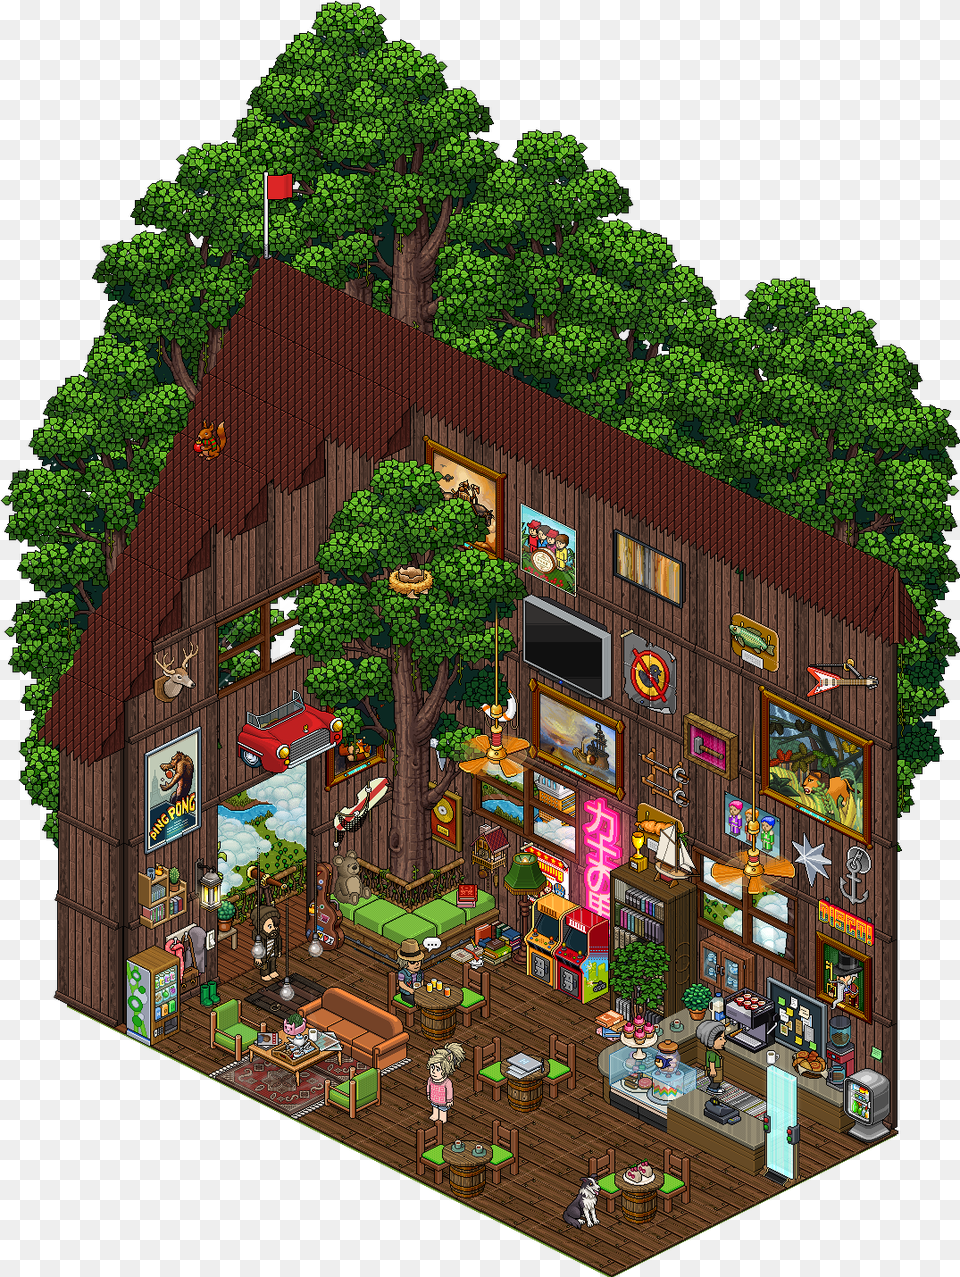 Download Habbo Hotel Tree House Full Size Image Pngkit Tree, City, Architecture, Building, Person Png